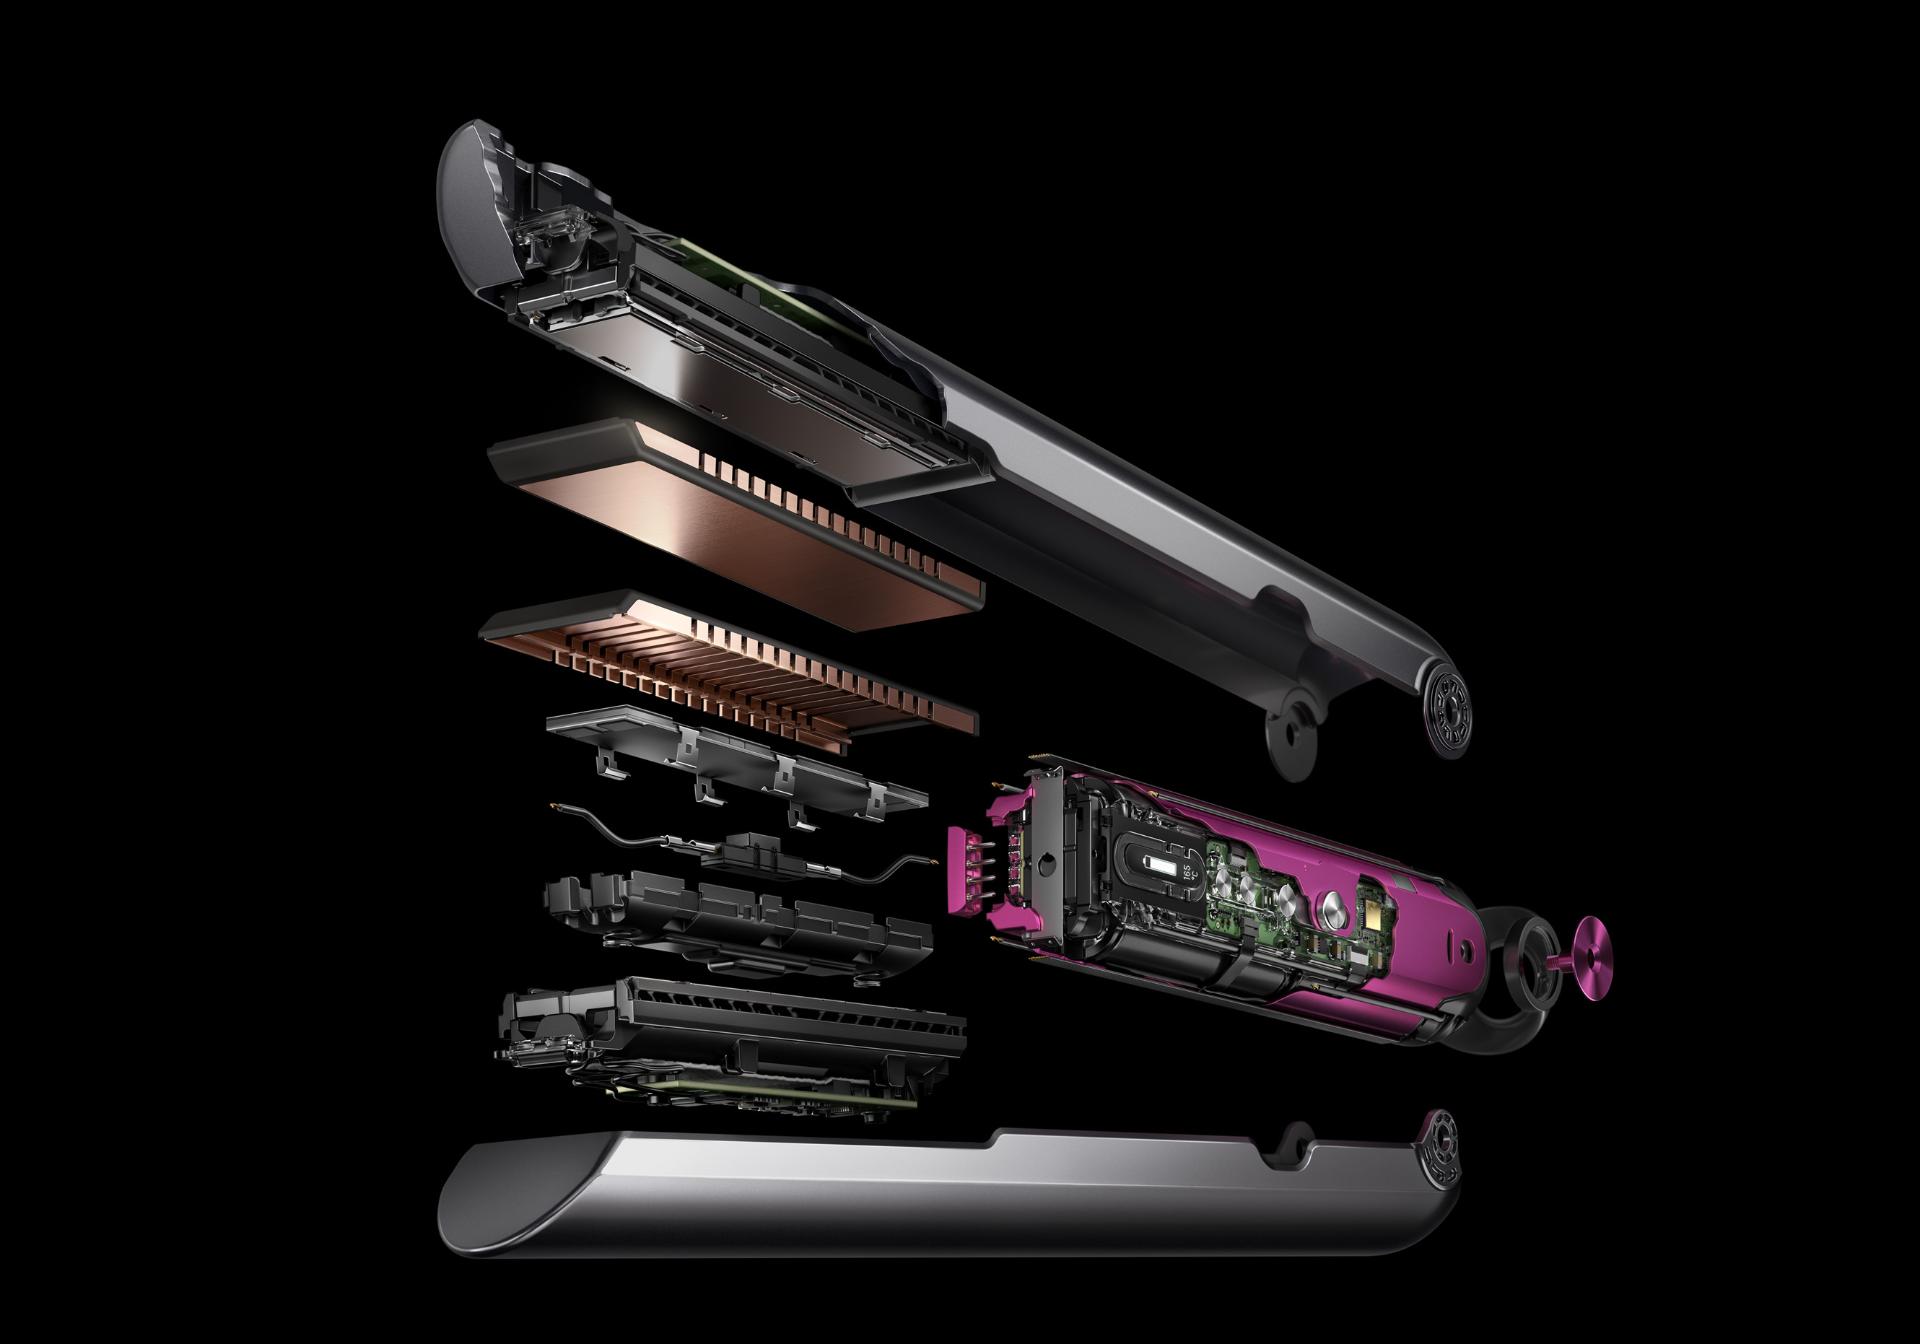 Image of the Dyson Corrale™ straightener opening up with all of its technology inside